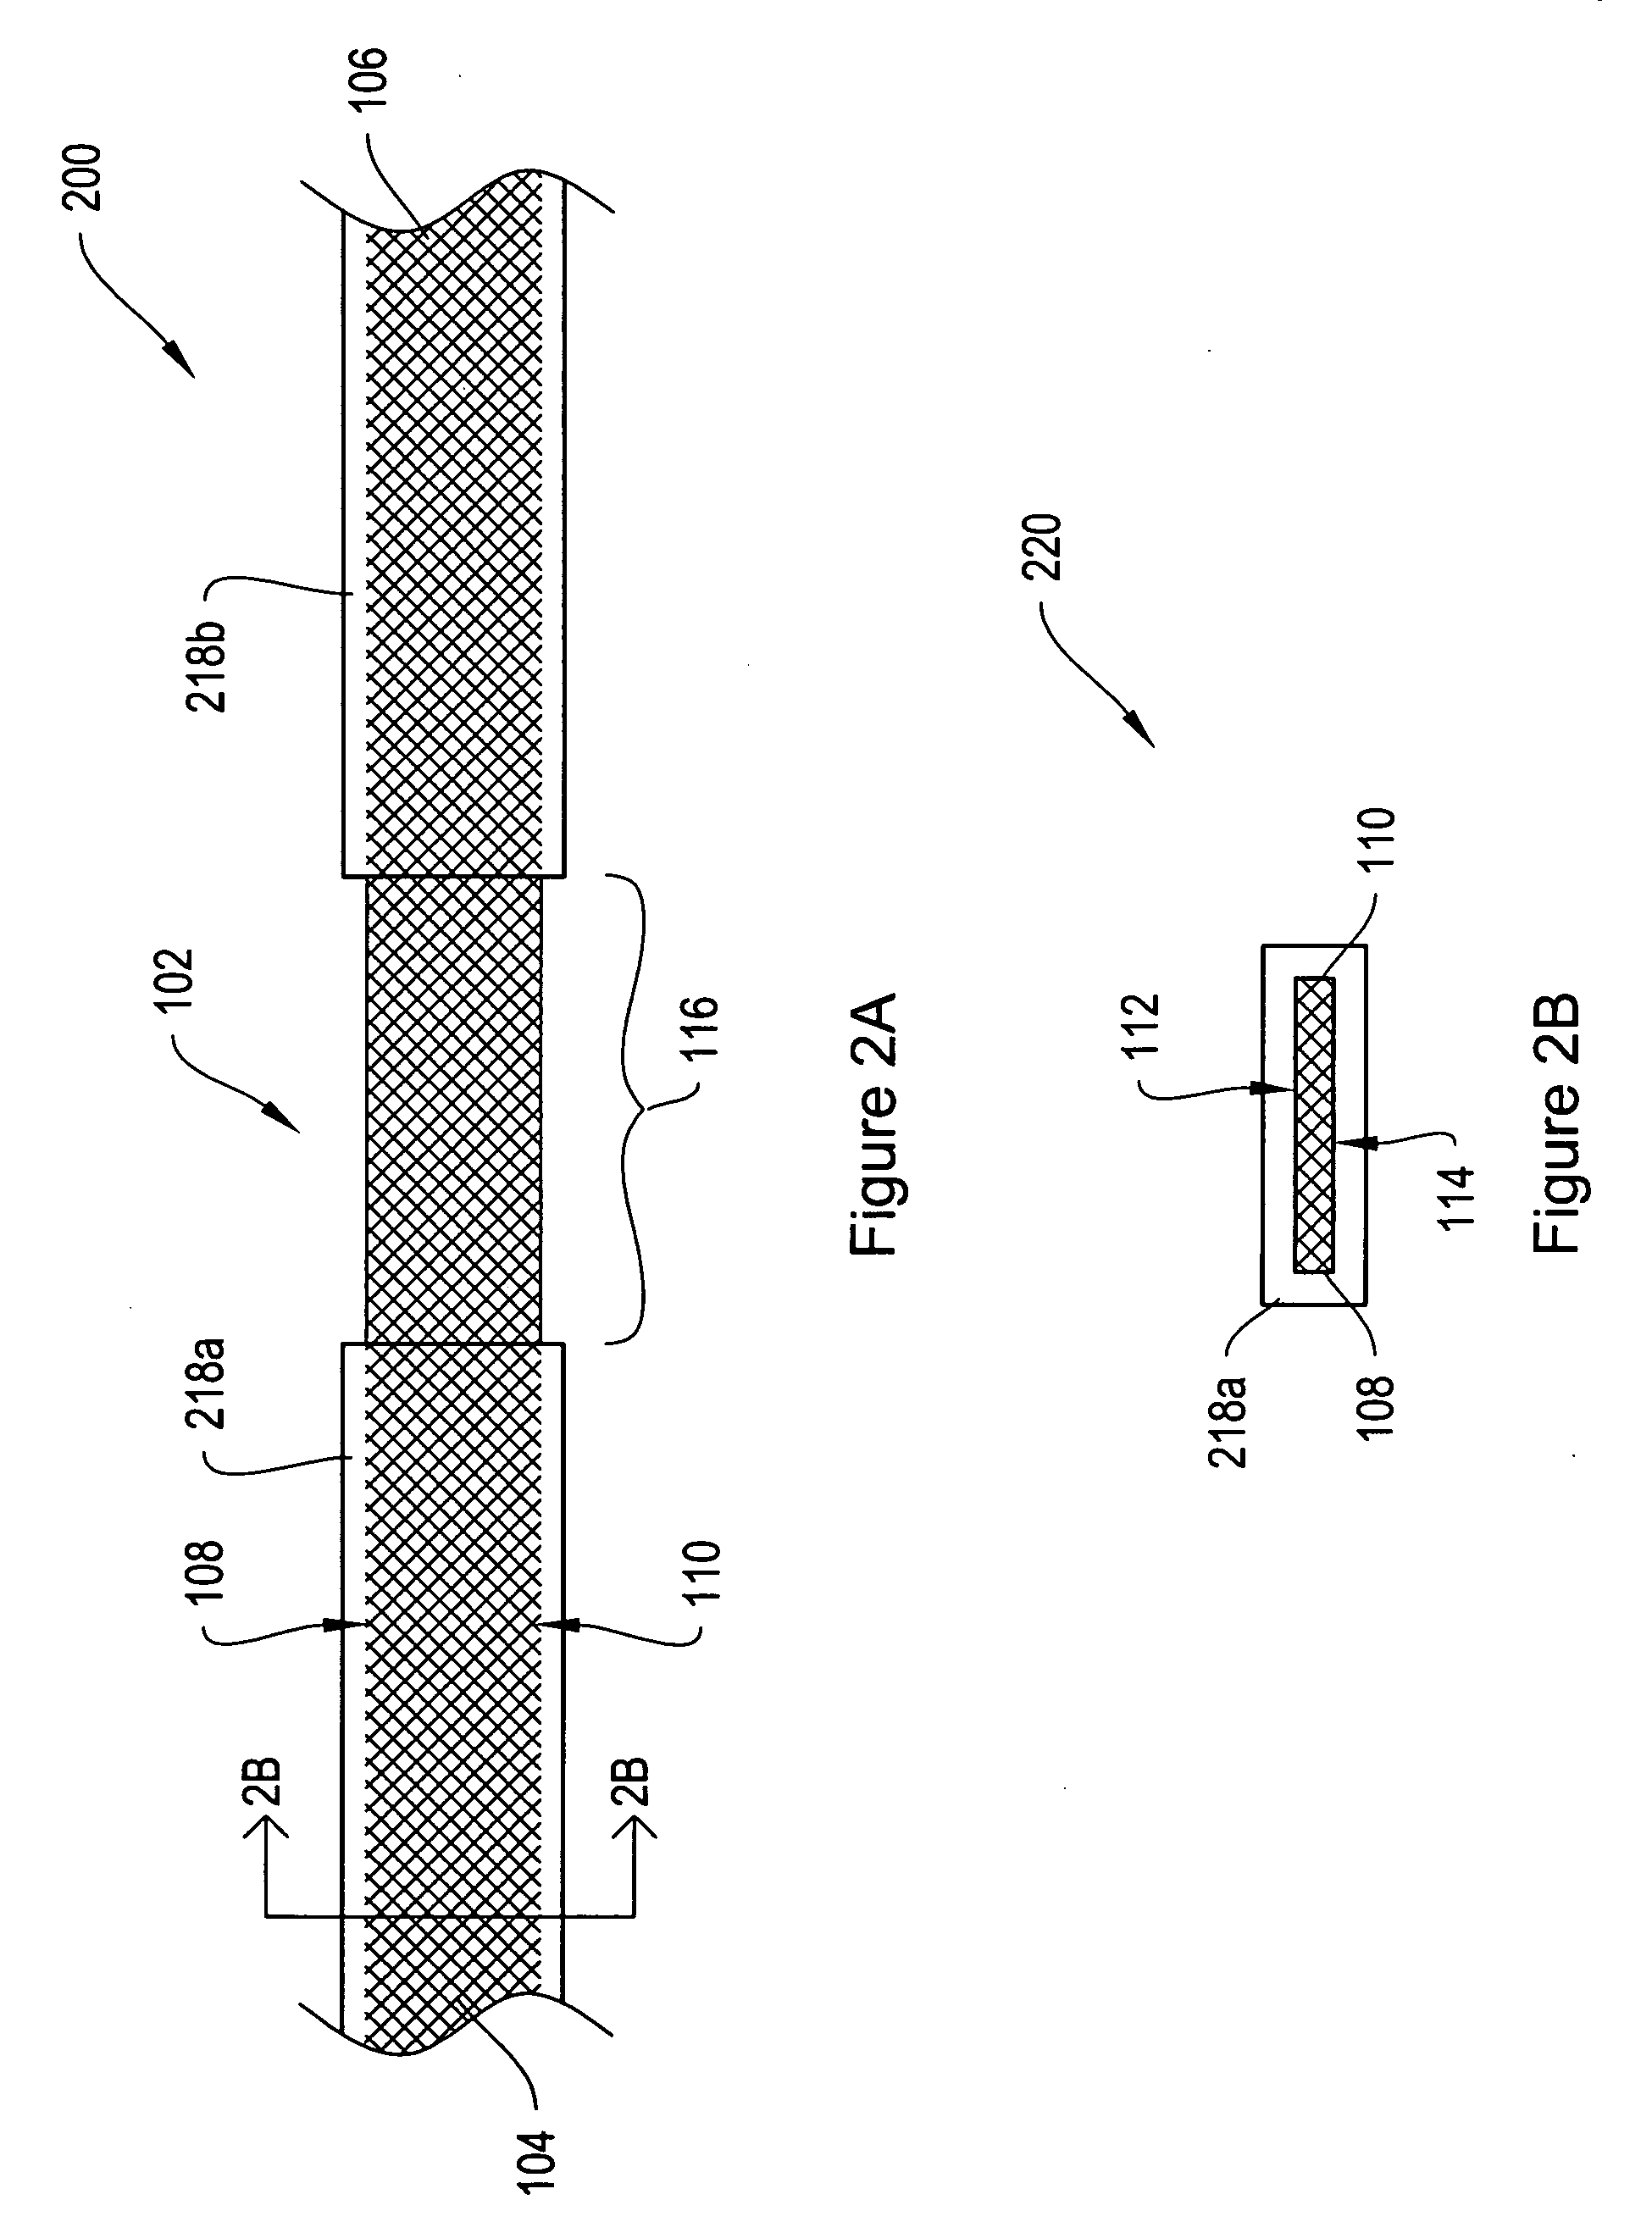 Dissolvable protective treatment for an implantable supportive sling